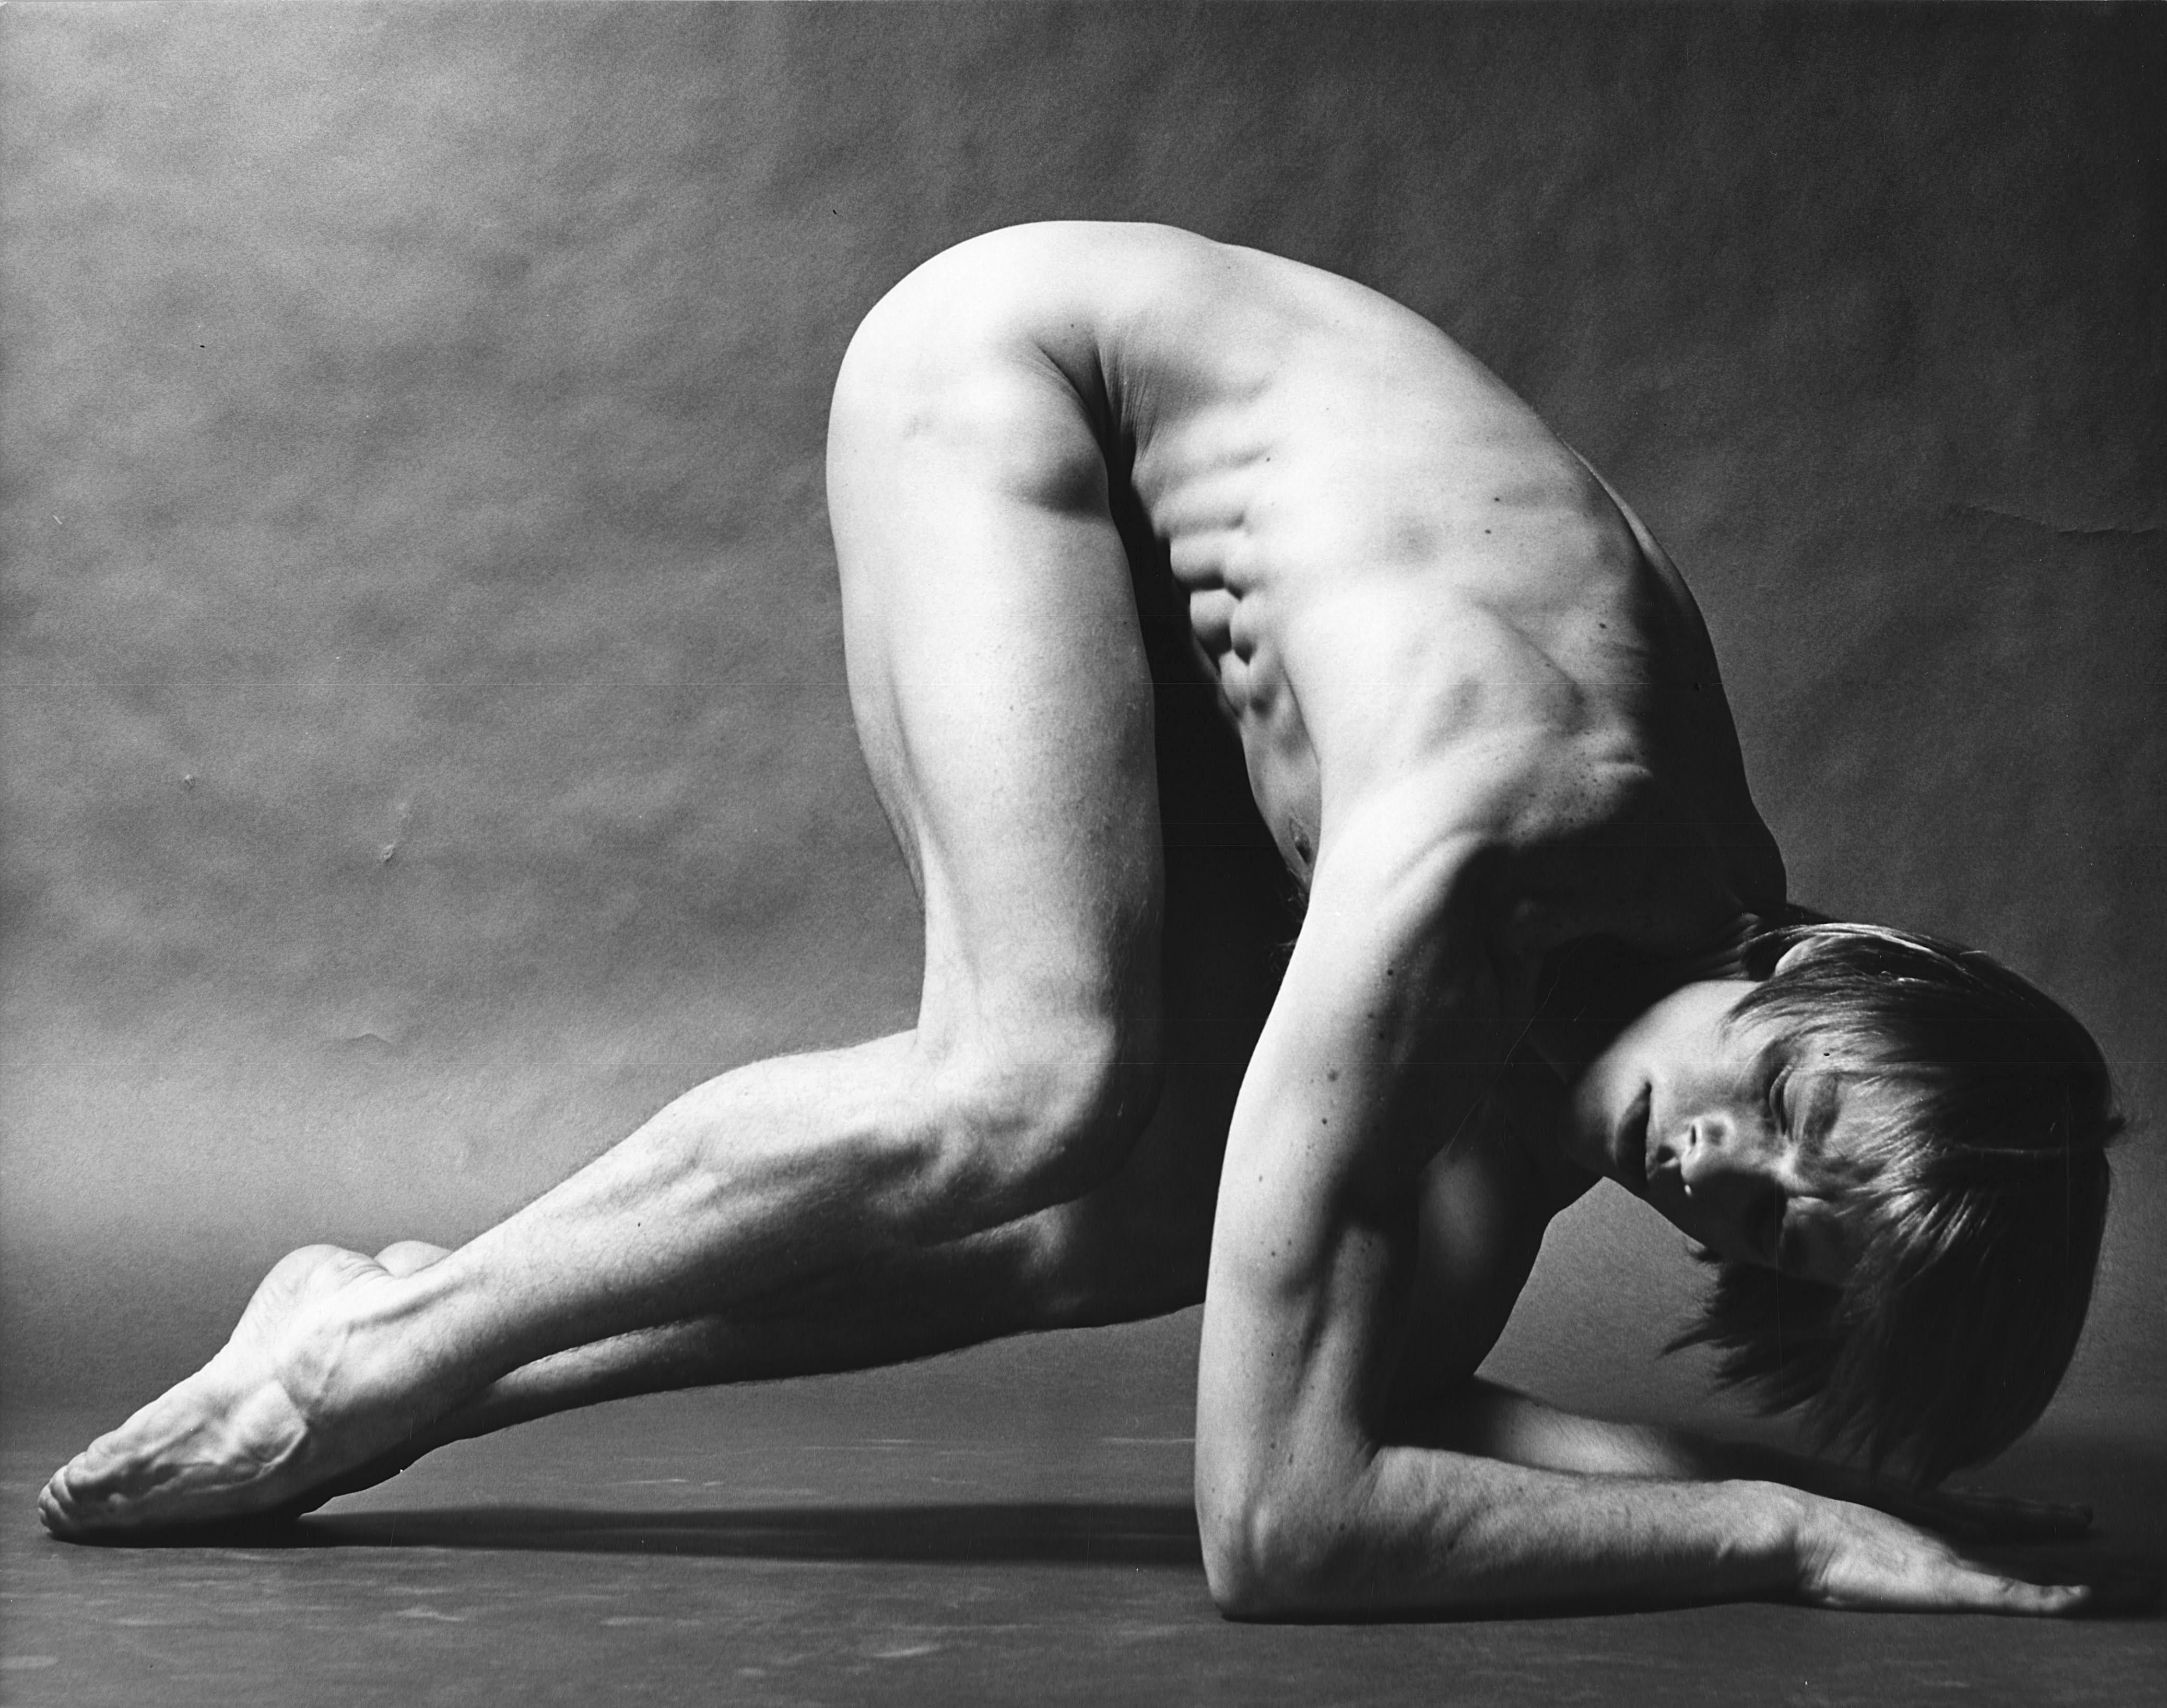 Jack Mitchell Nude Photograph - Harkness Ballet Dancer Zane Wilson, photographed nude for After Dark magazine